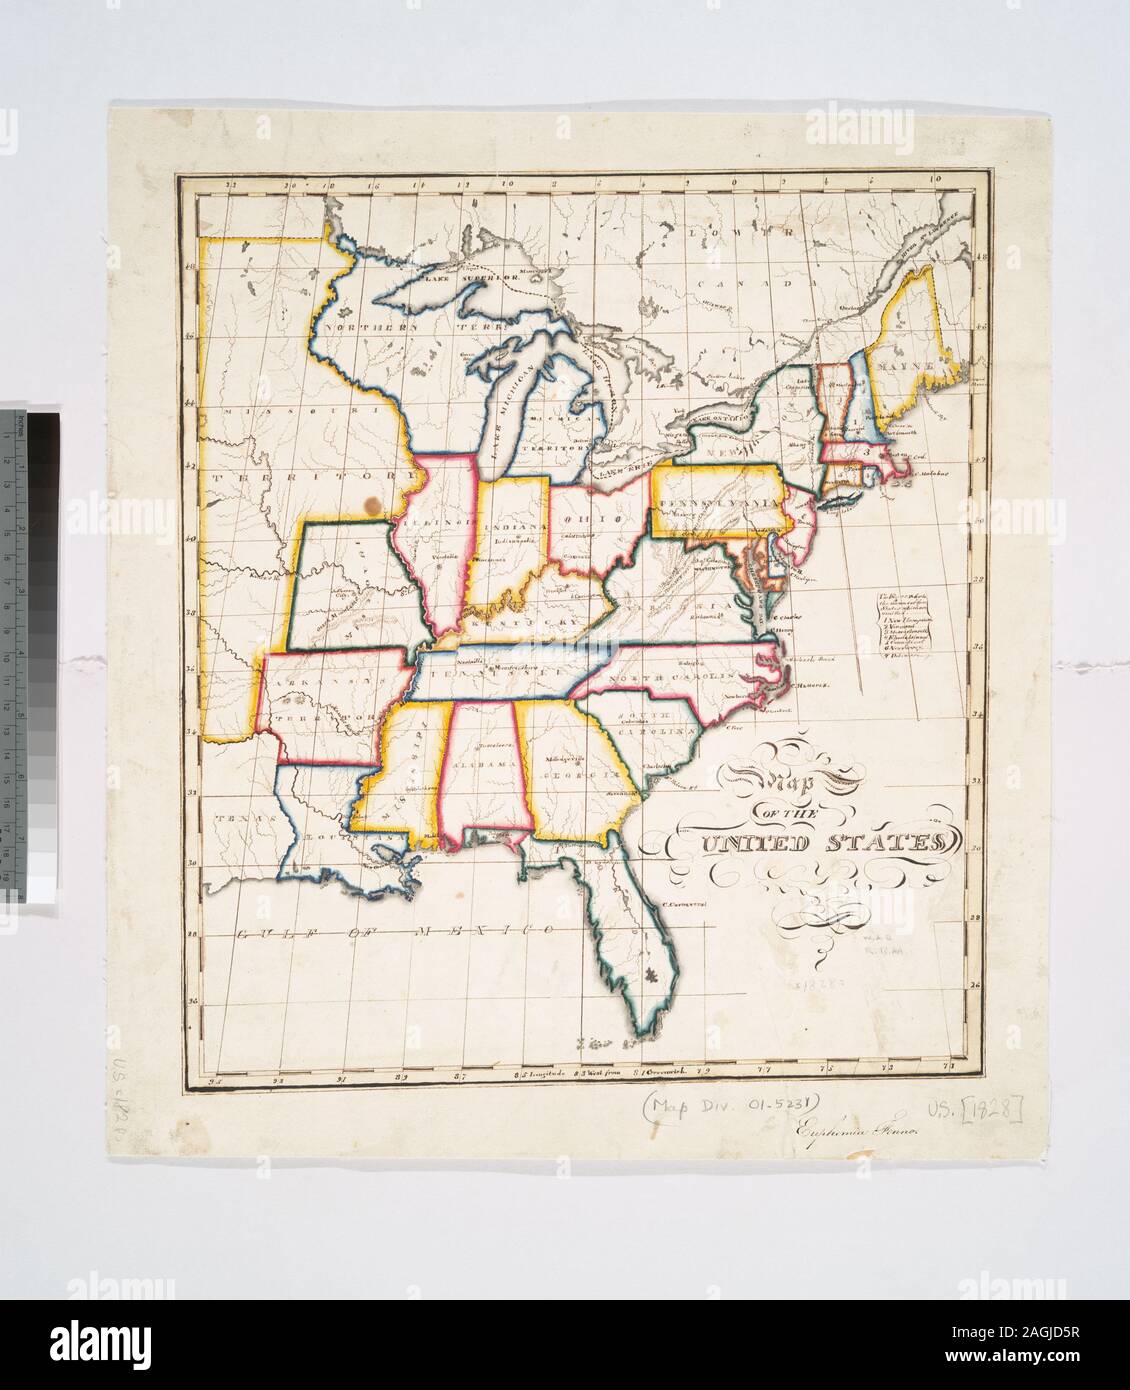 National Endowment For The Humanities Grant For Access To Early Maps Of The Middle Atlantic 8076